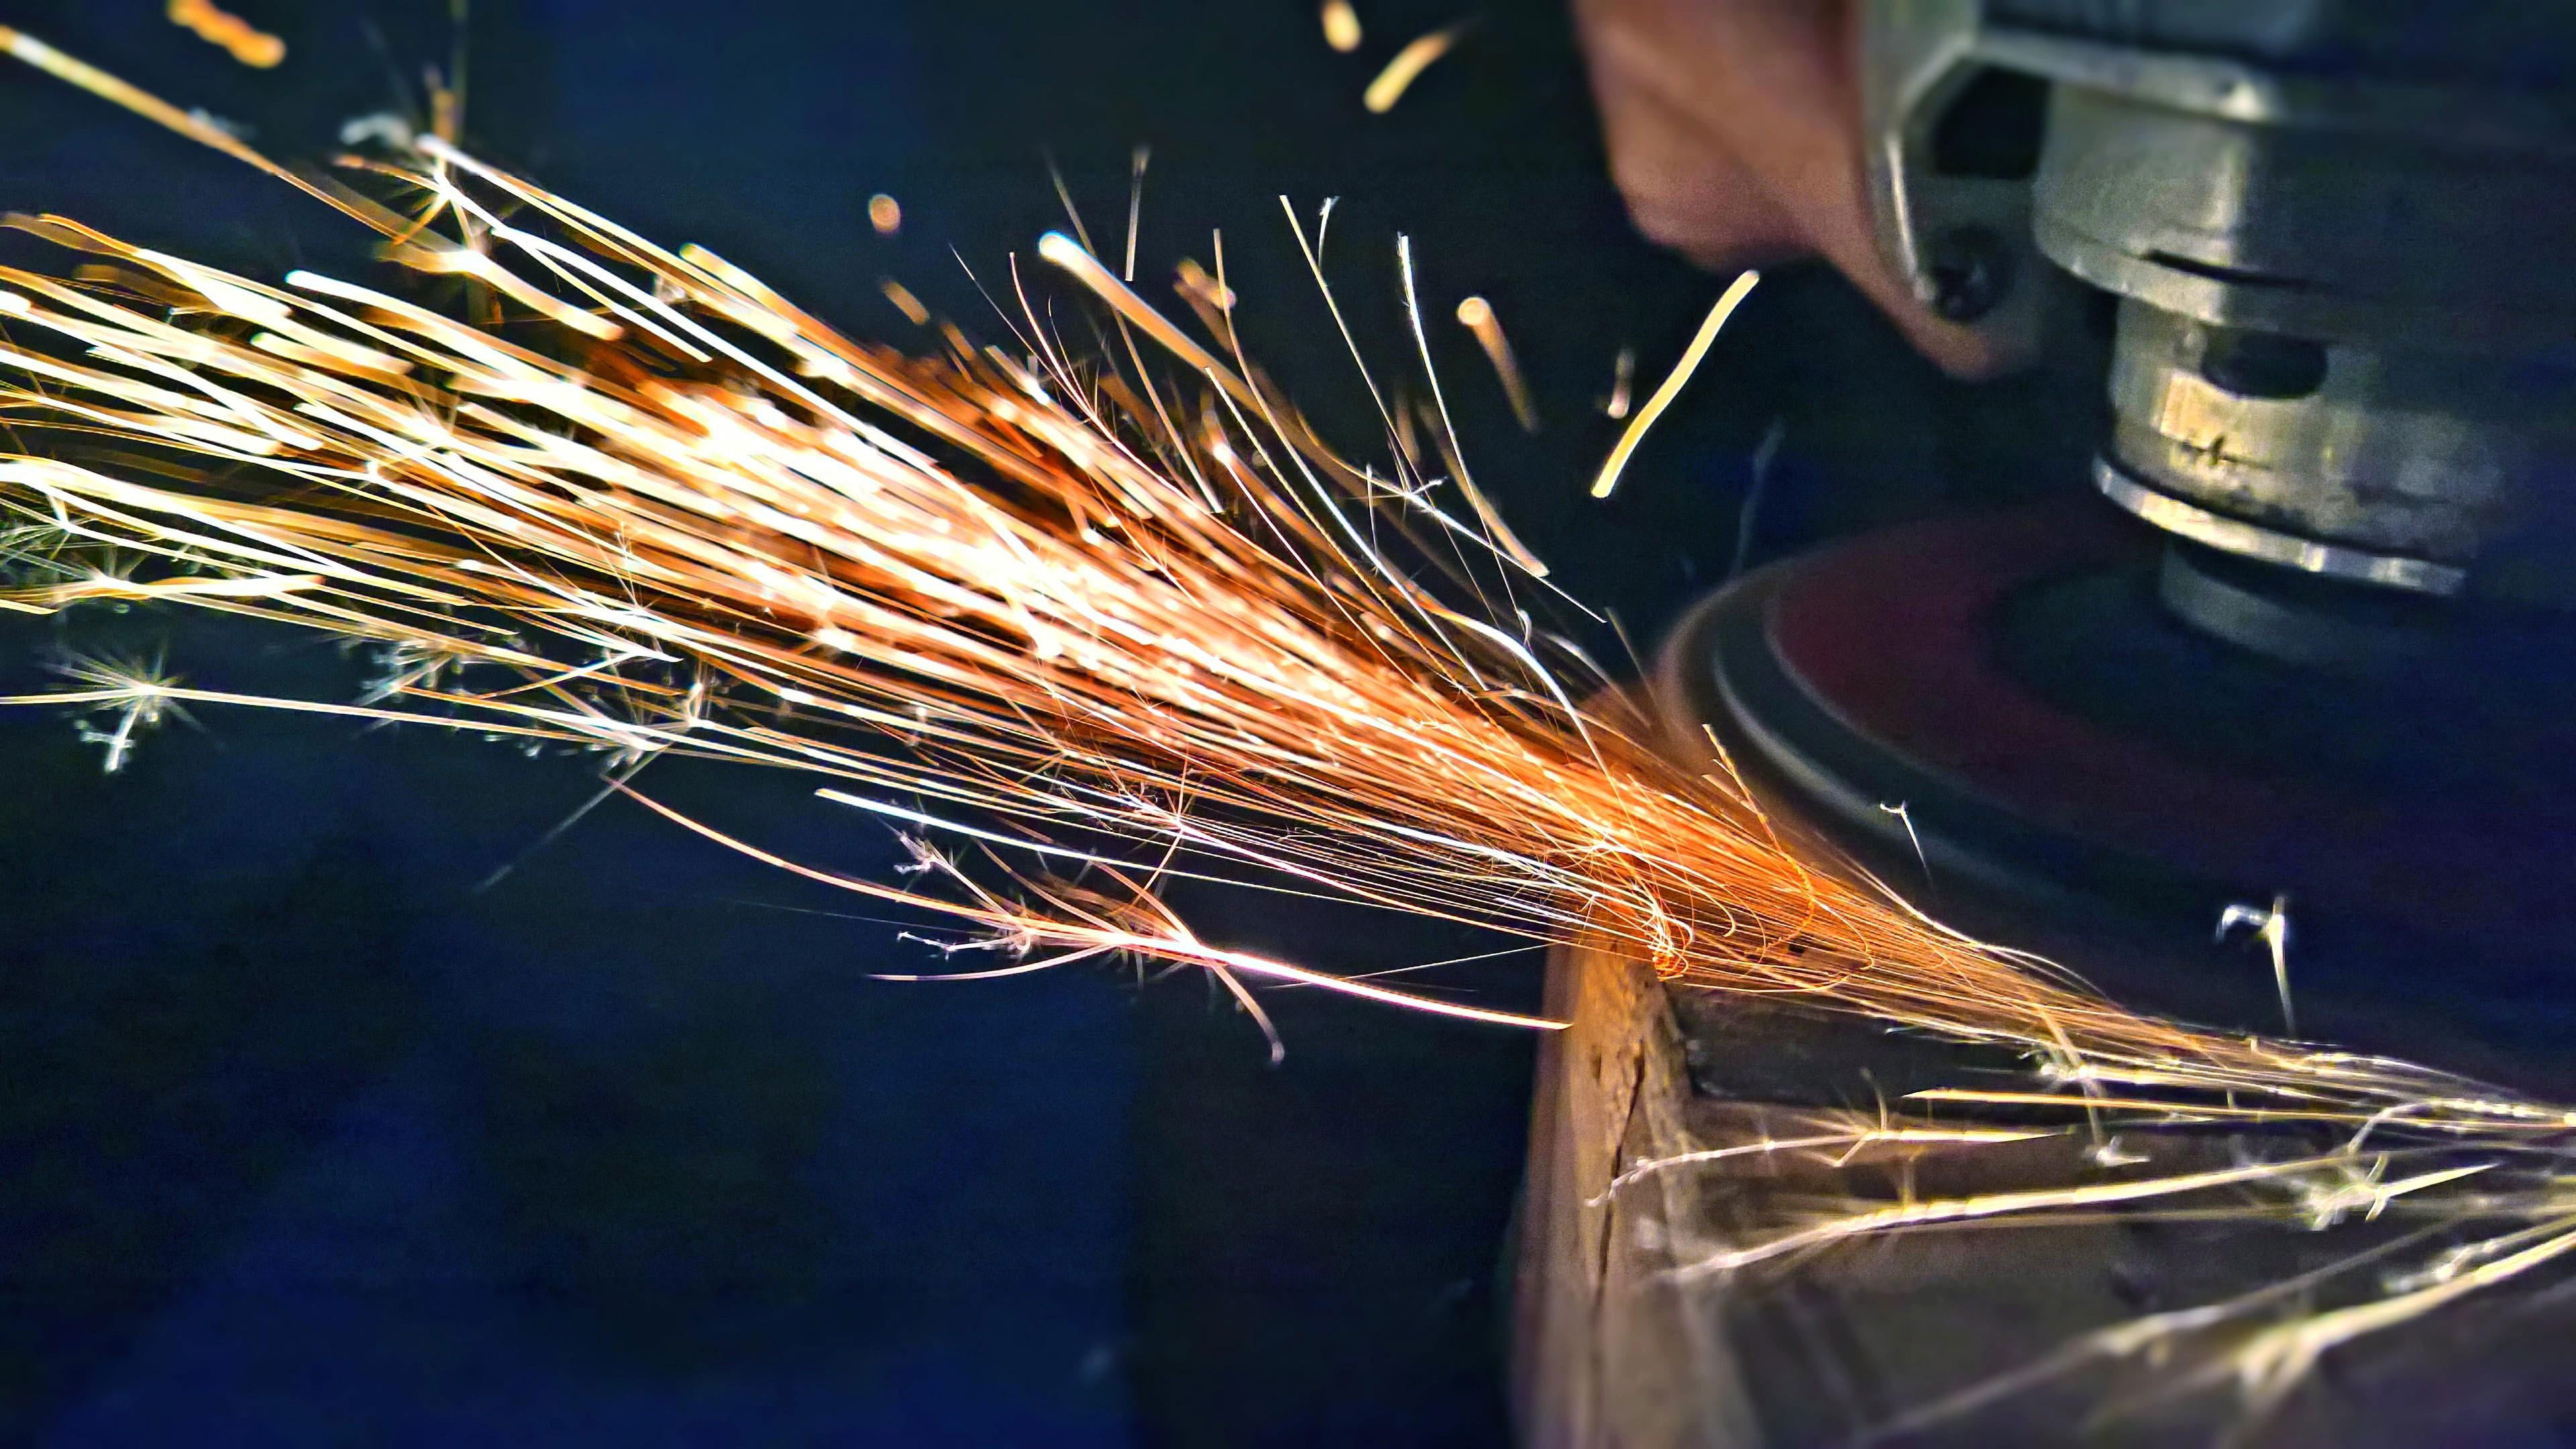 Wallpaper Light, Welding, Sparks, Motion, One Person, Worker, Welding, Other